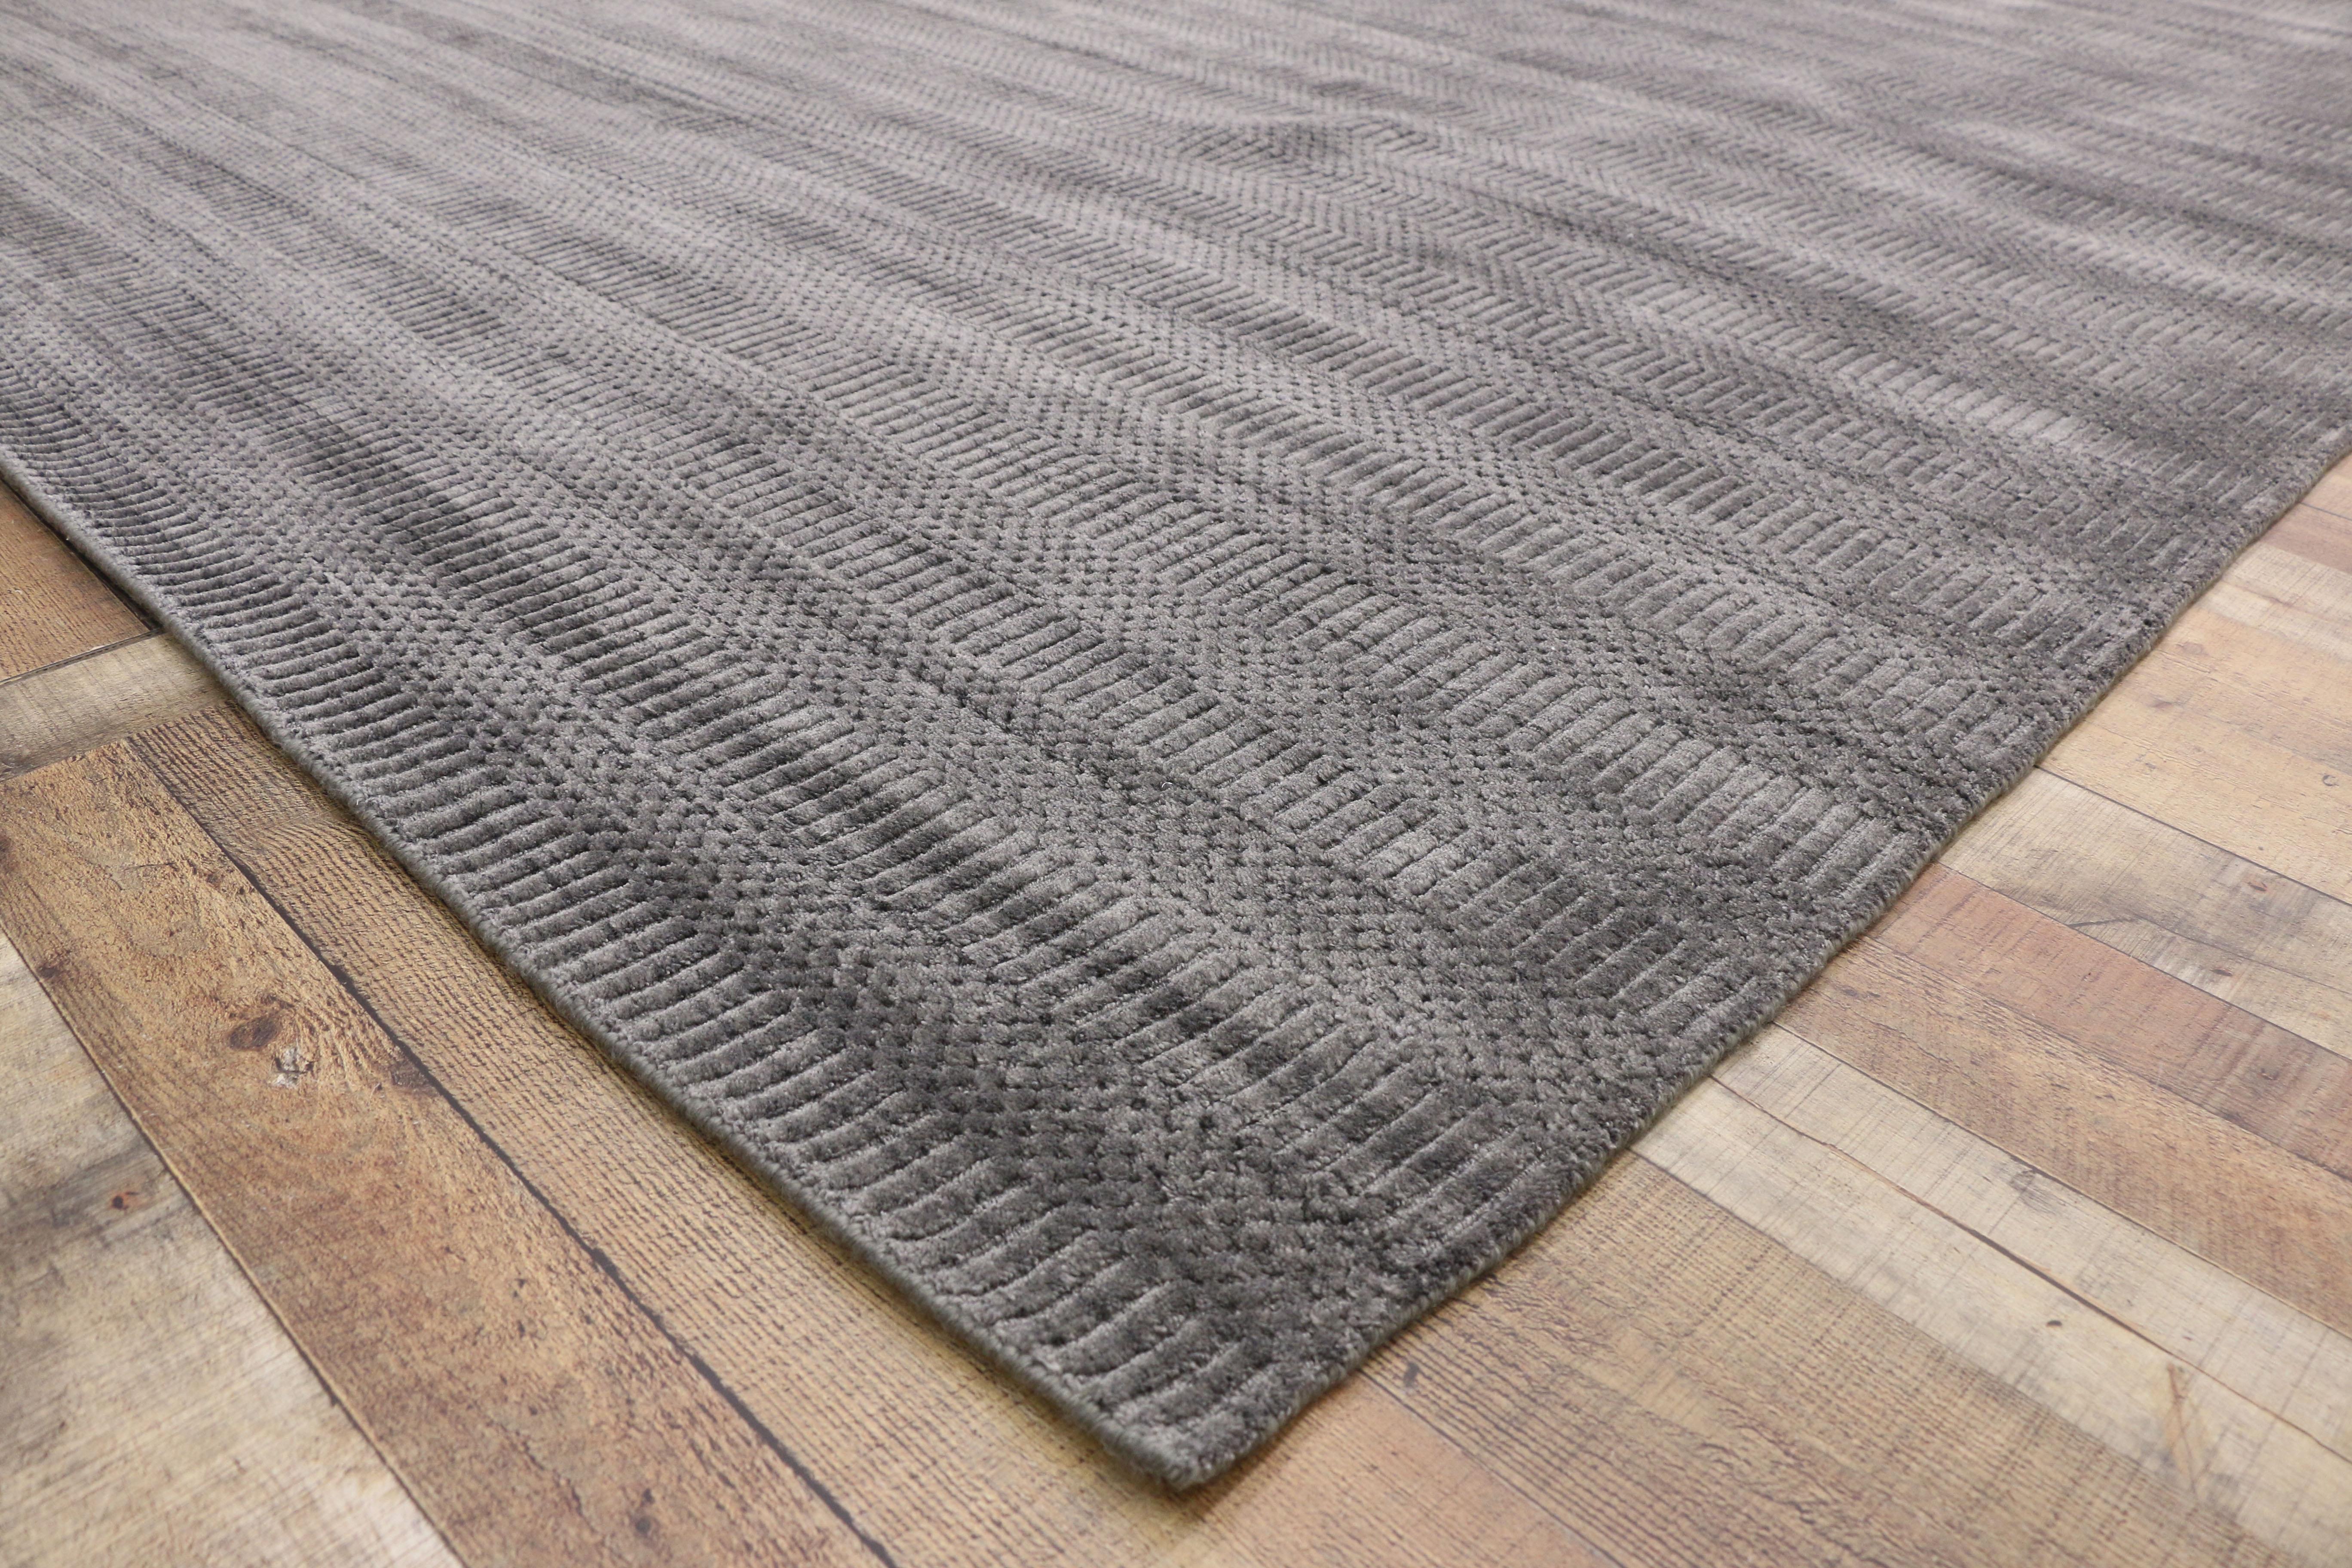 Indian New Transitional Gray Area Rug with Modern Scandinavian Danish Style